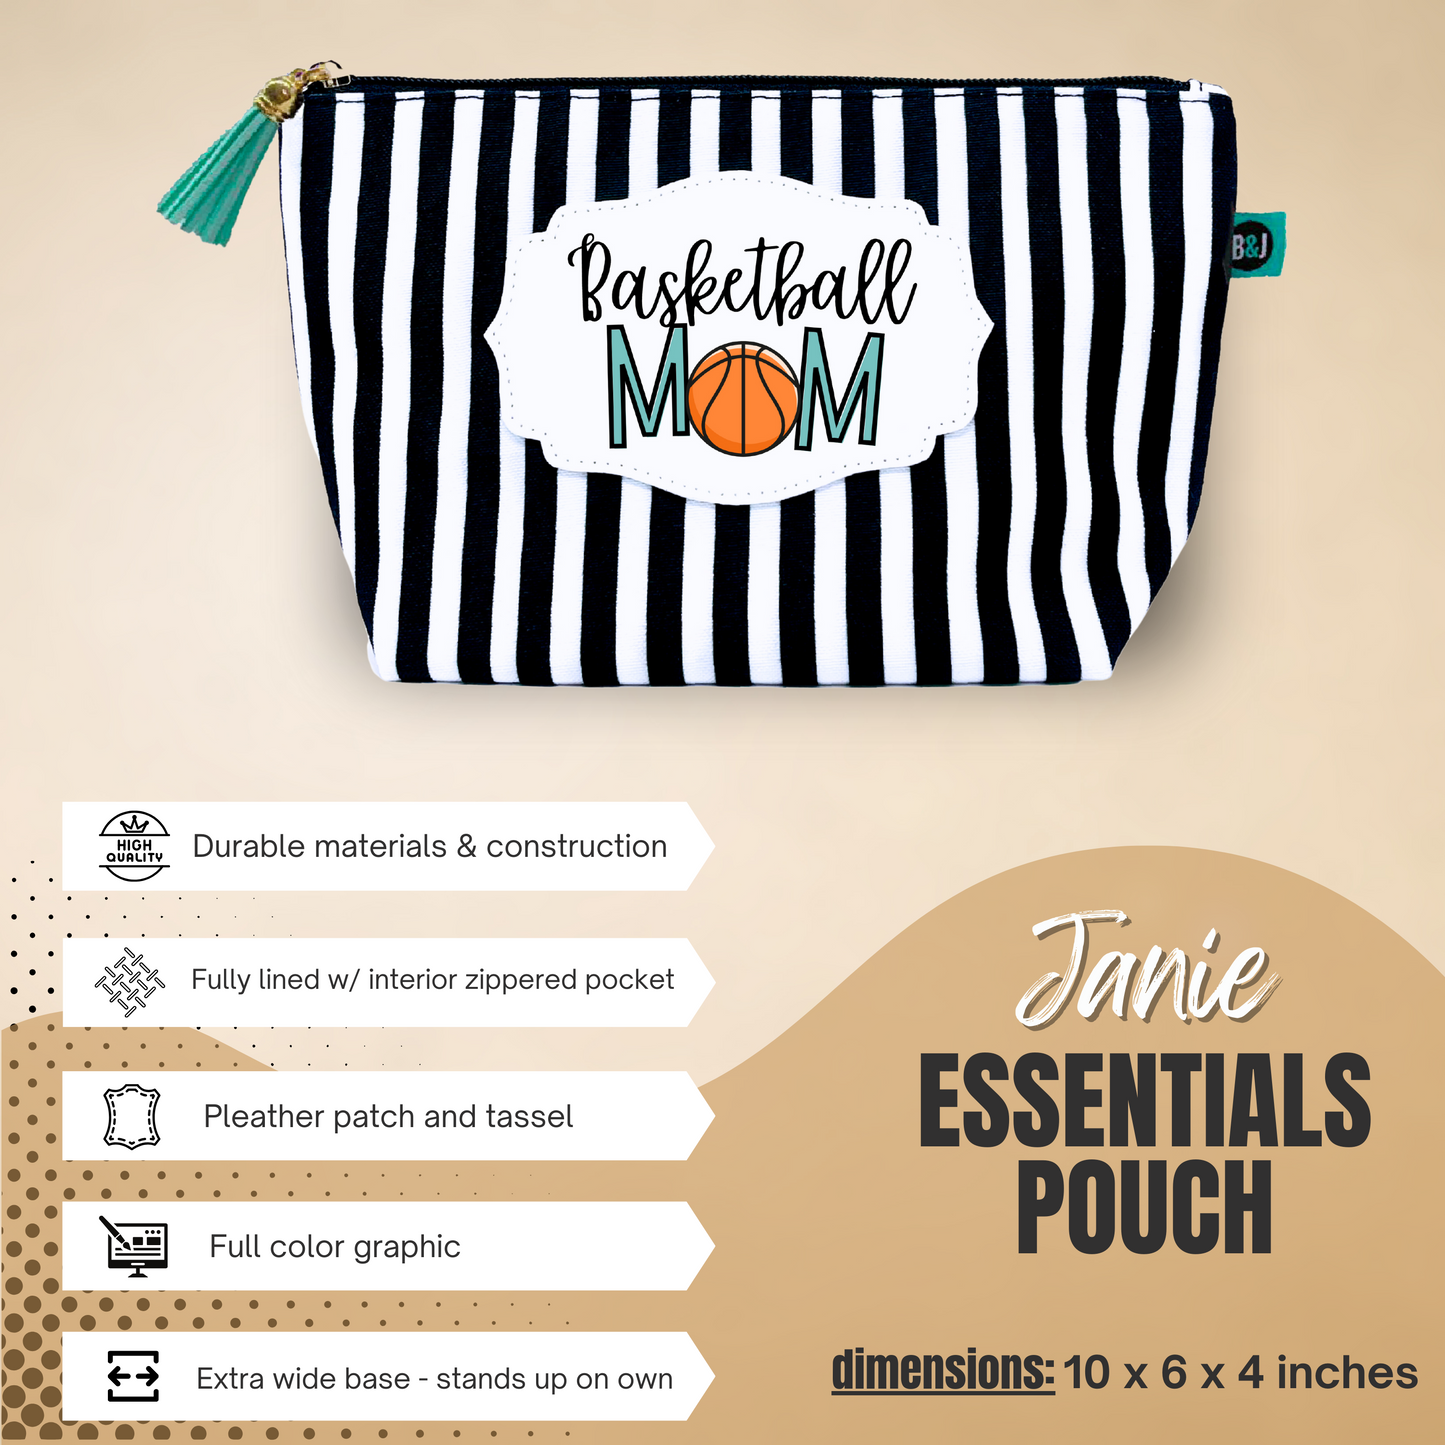 Brooke and Jess Designs - Basketball Mom Tessa Black Tote Bag, 24 oz Waterbottle Tumbler, and Janie Makeup Cosmetic Bag Gift Box Set